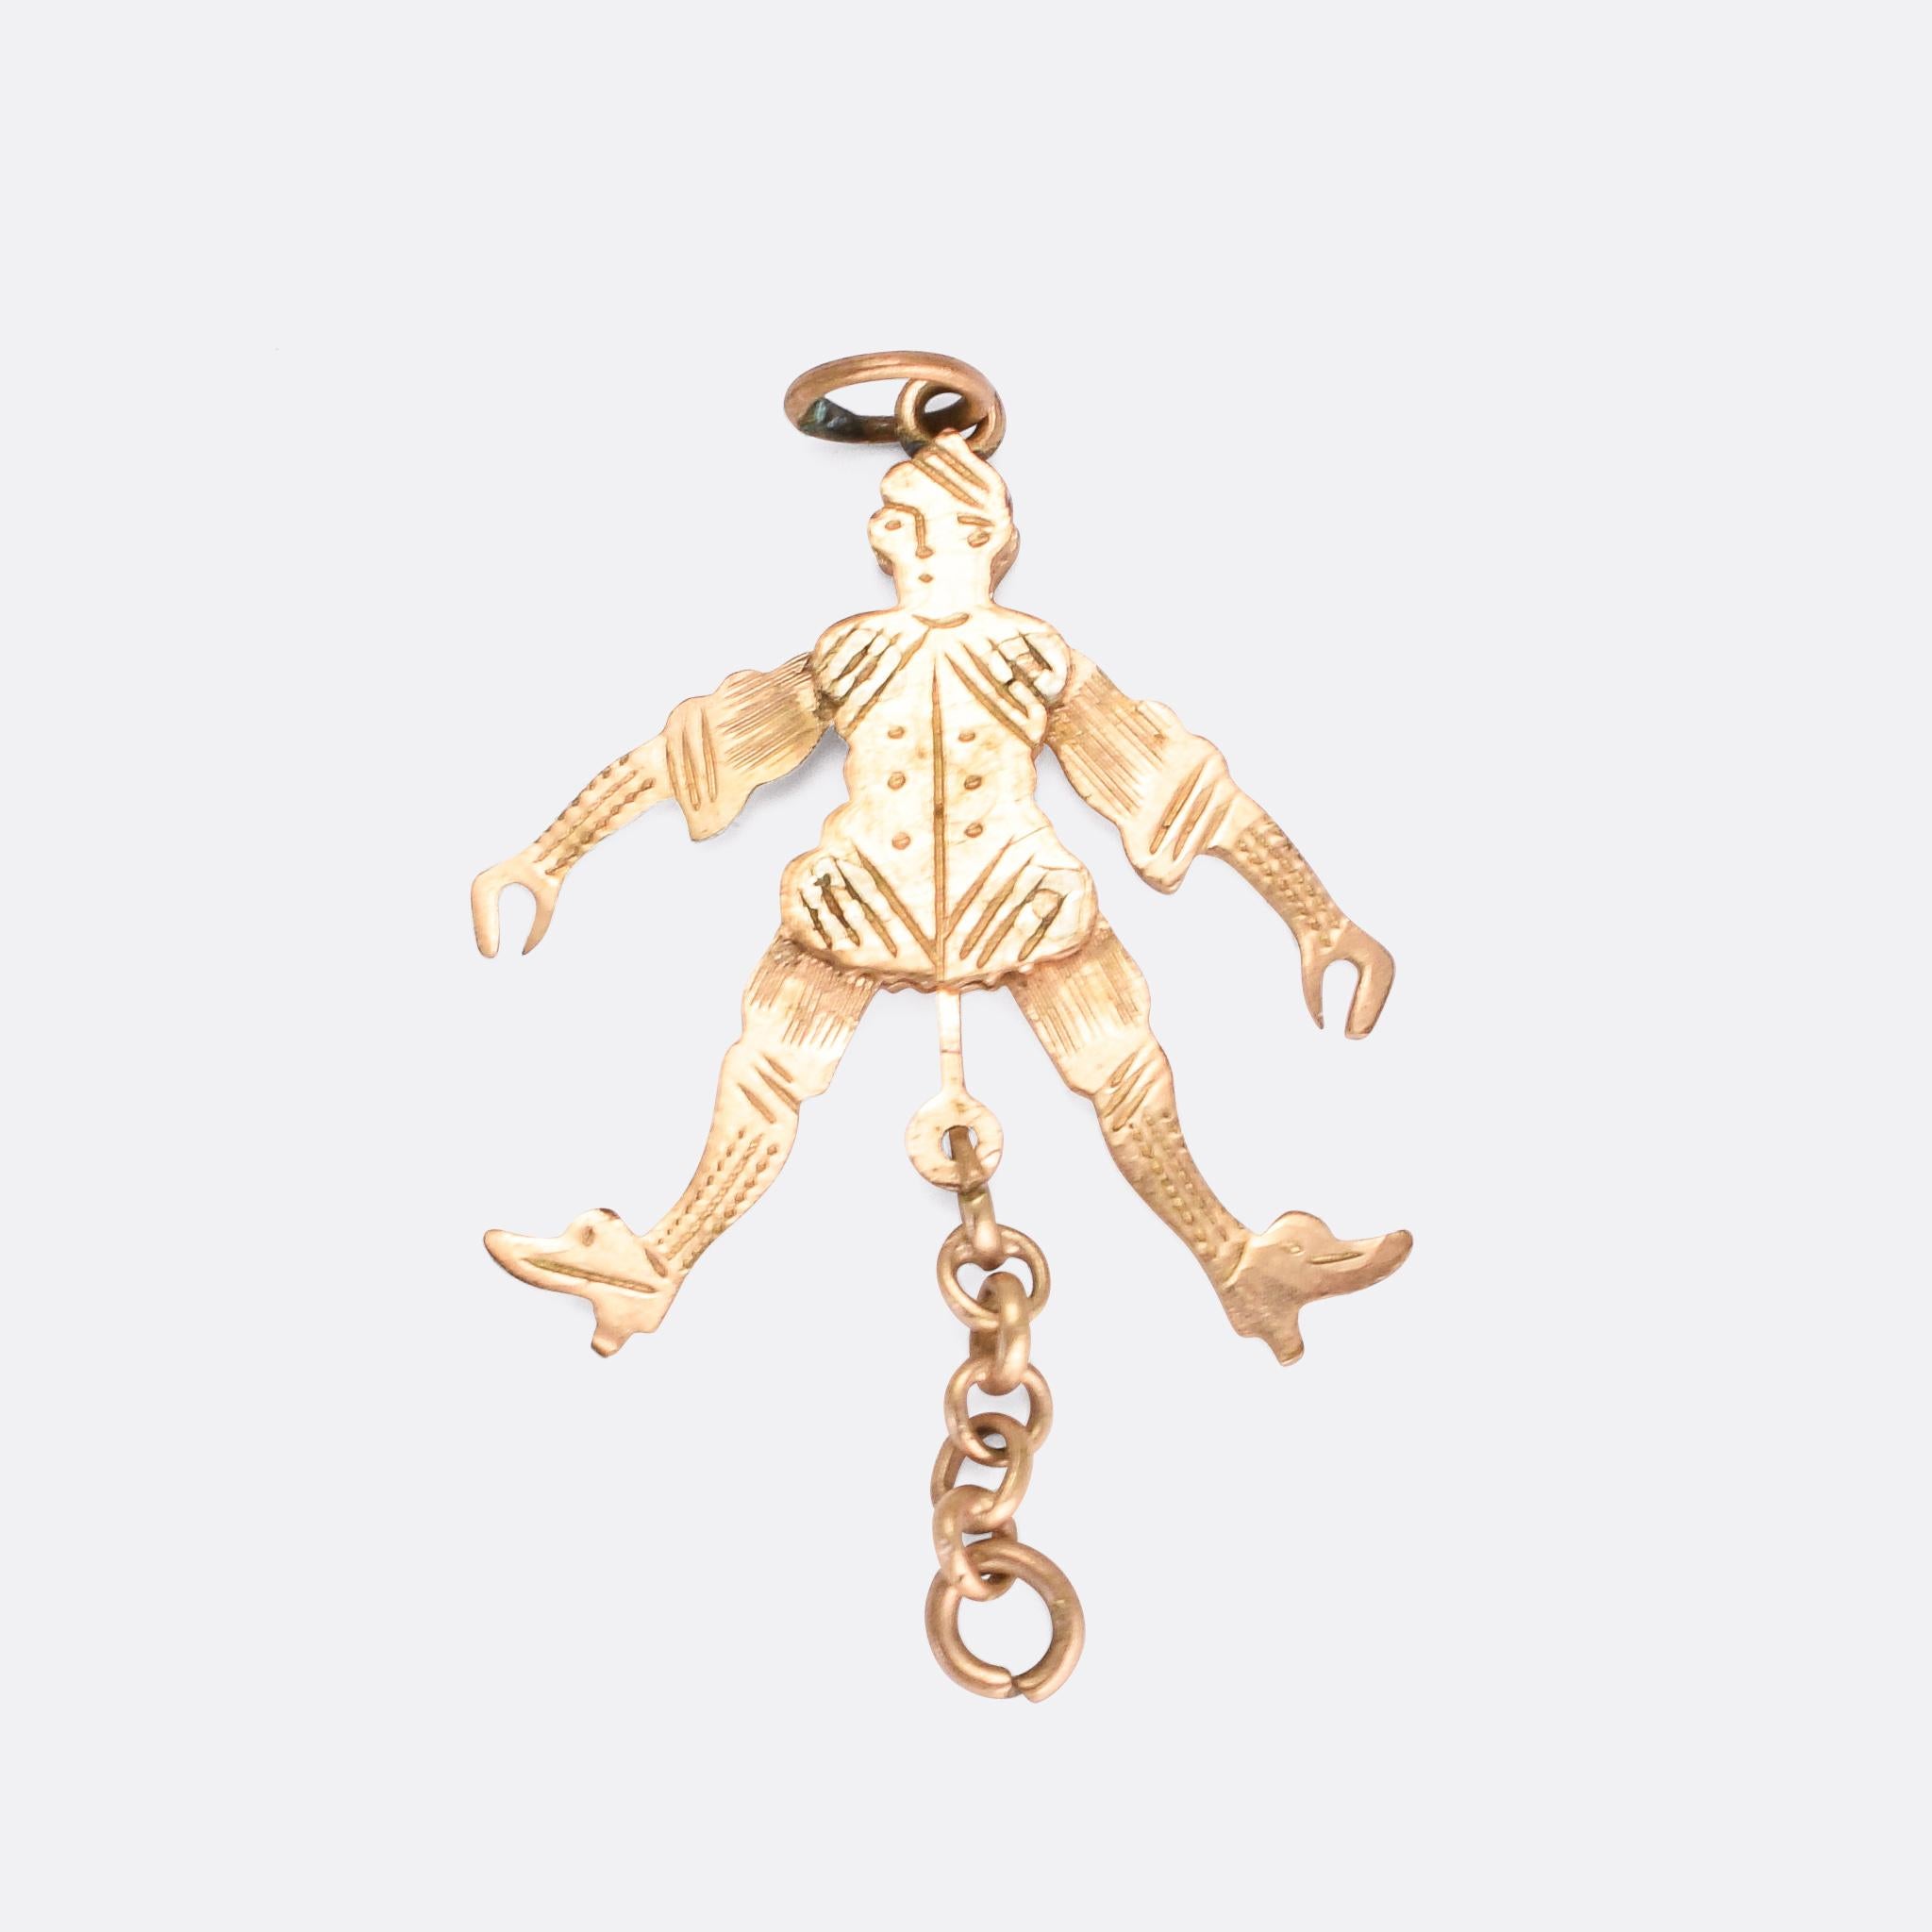 A cute antique novelty pendant modelled as a jester. The piece is articulated: when the chain at the bottom is pulled, the arms shoot up and the legs kick out. It's crafted in 9k gold and features hand-chased detaling to the face and